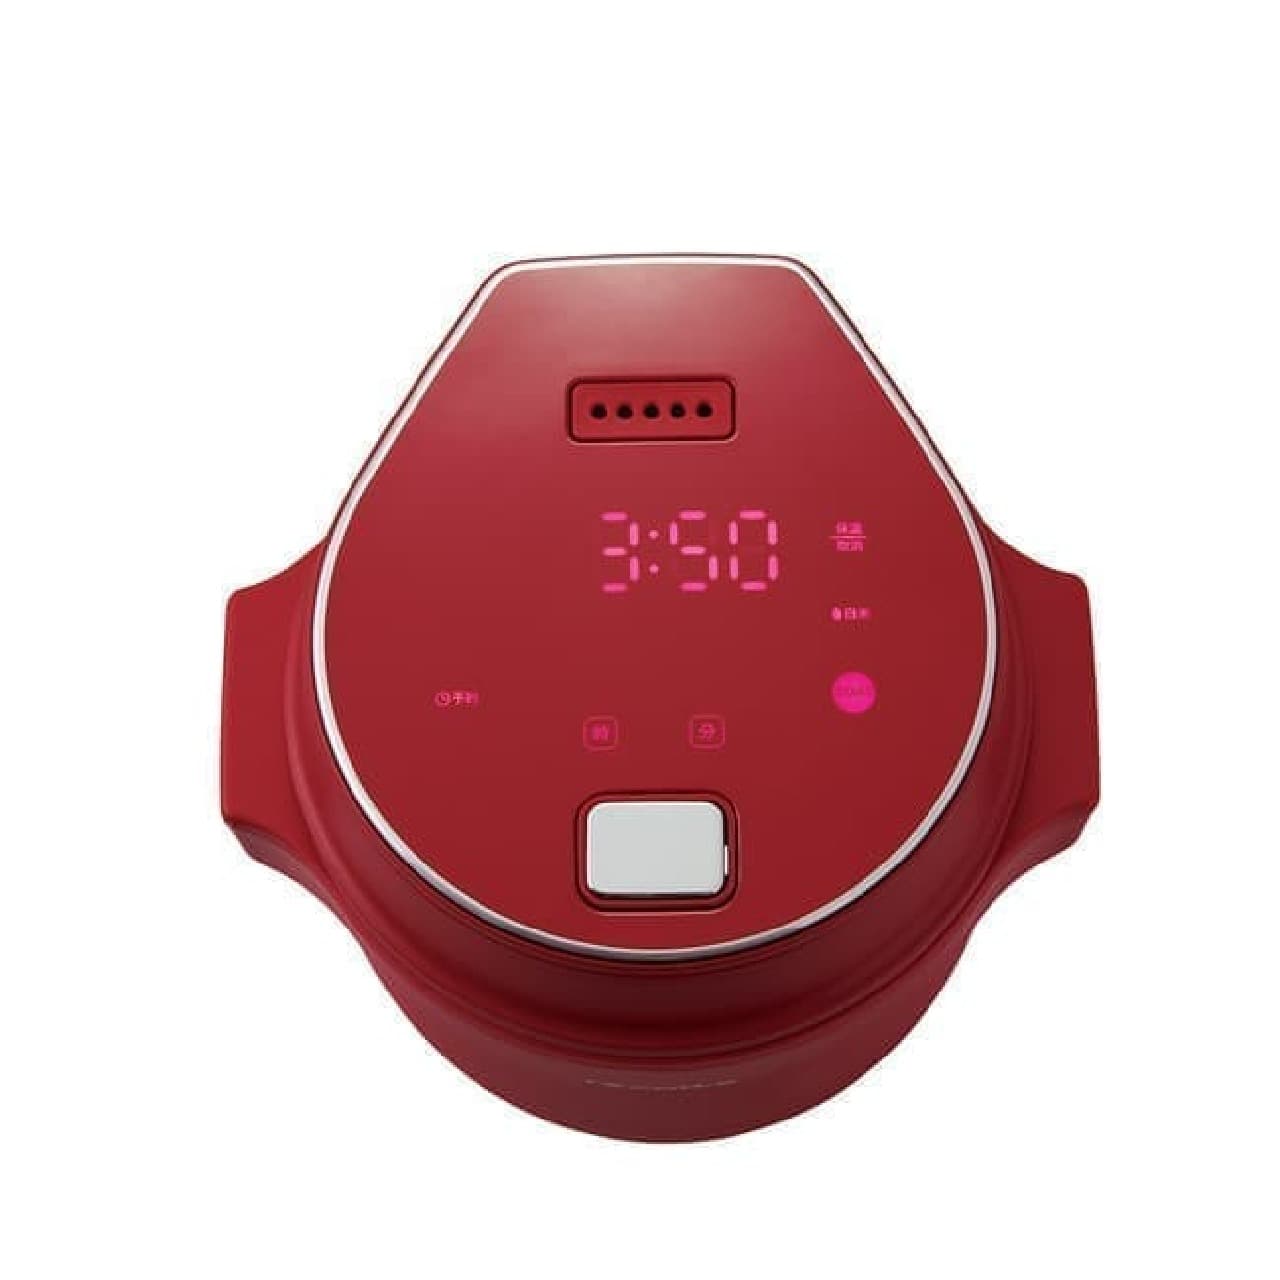 Recolt "Compact Rice Cooker" with new color "Red"